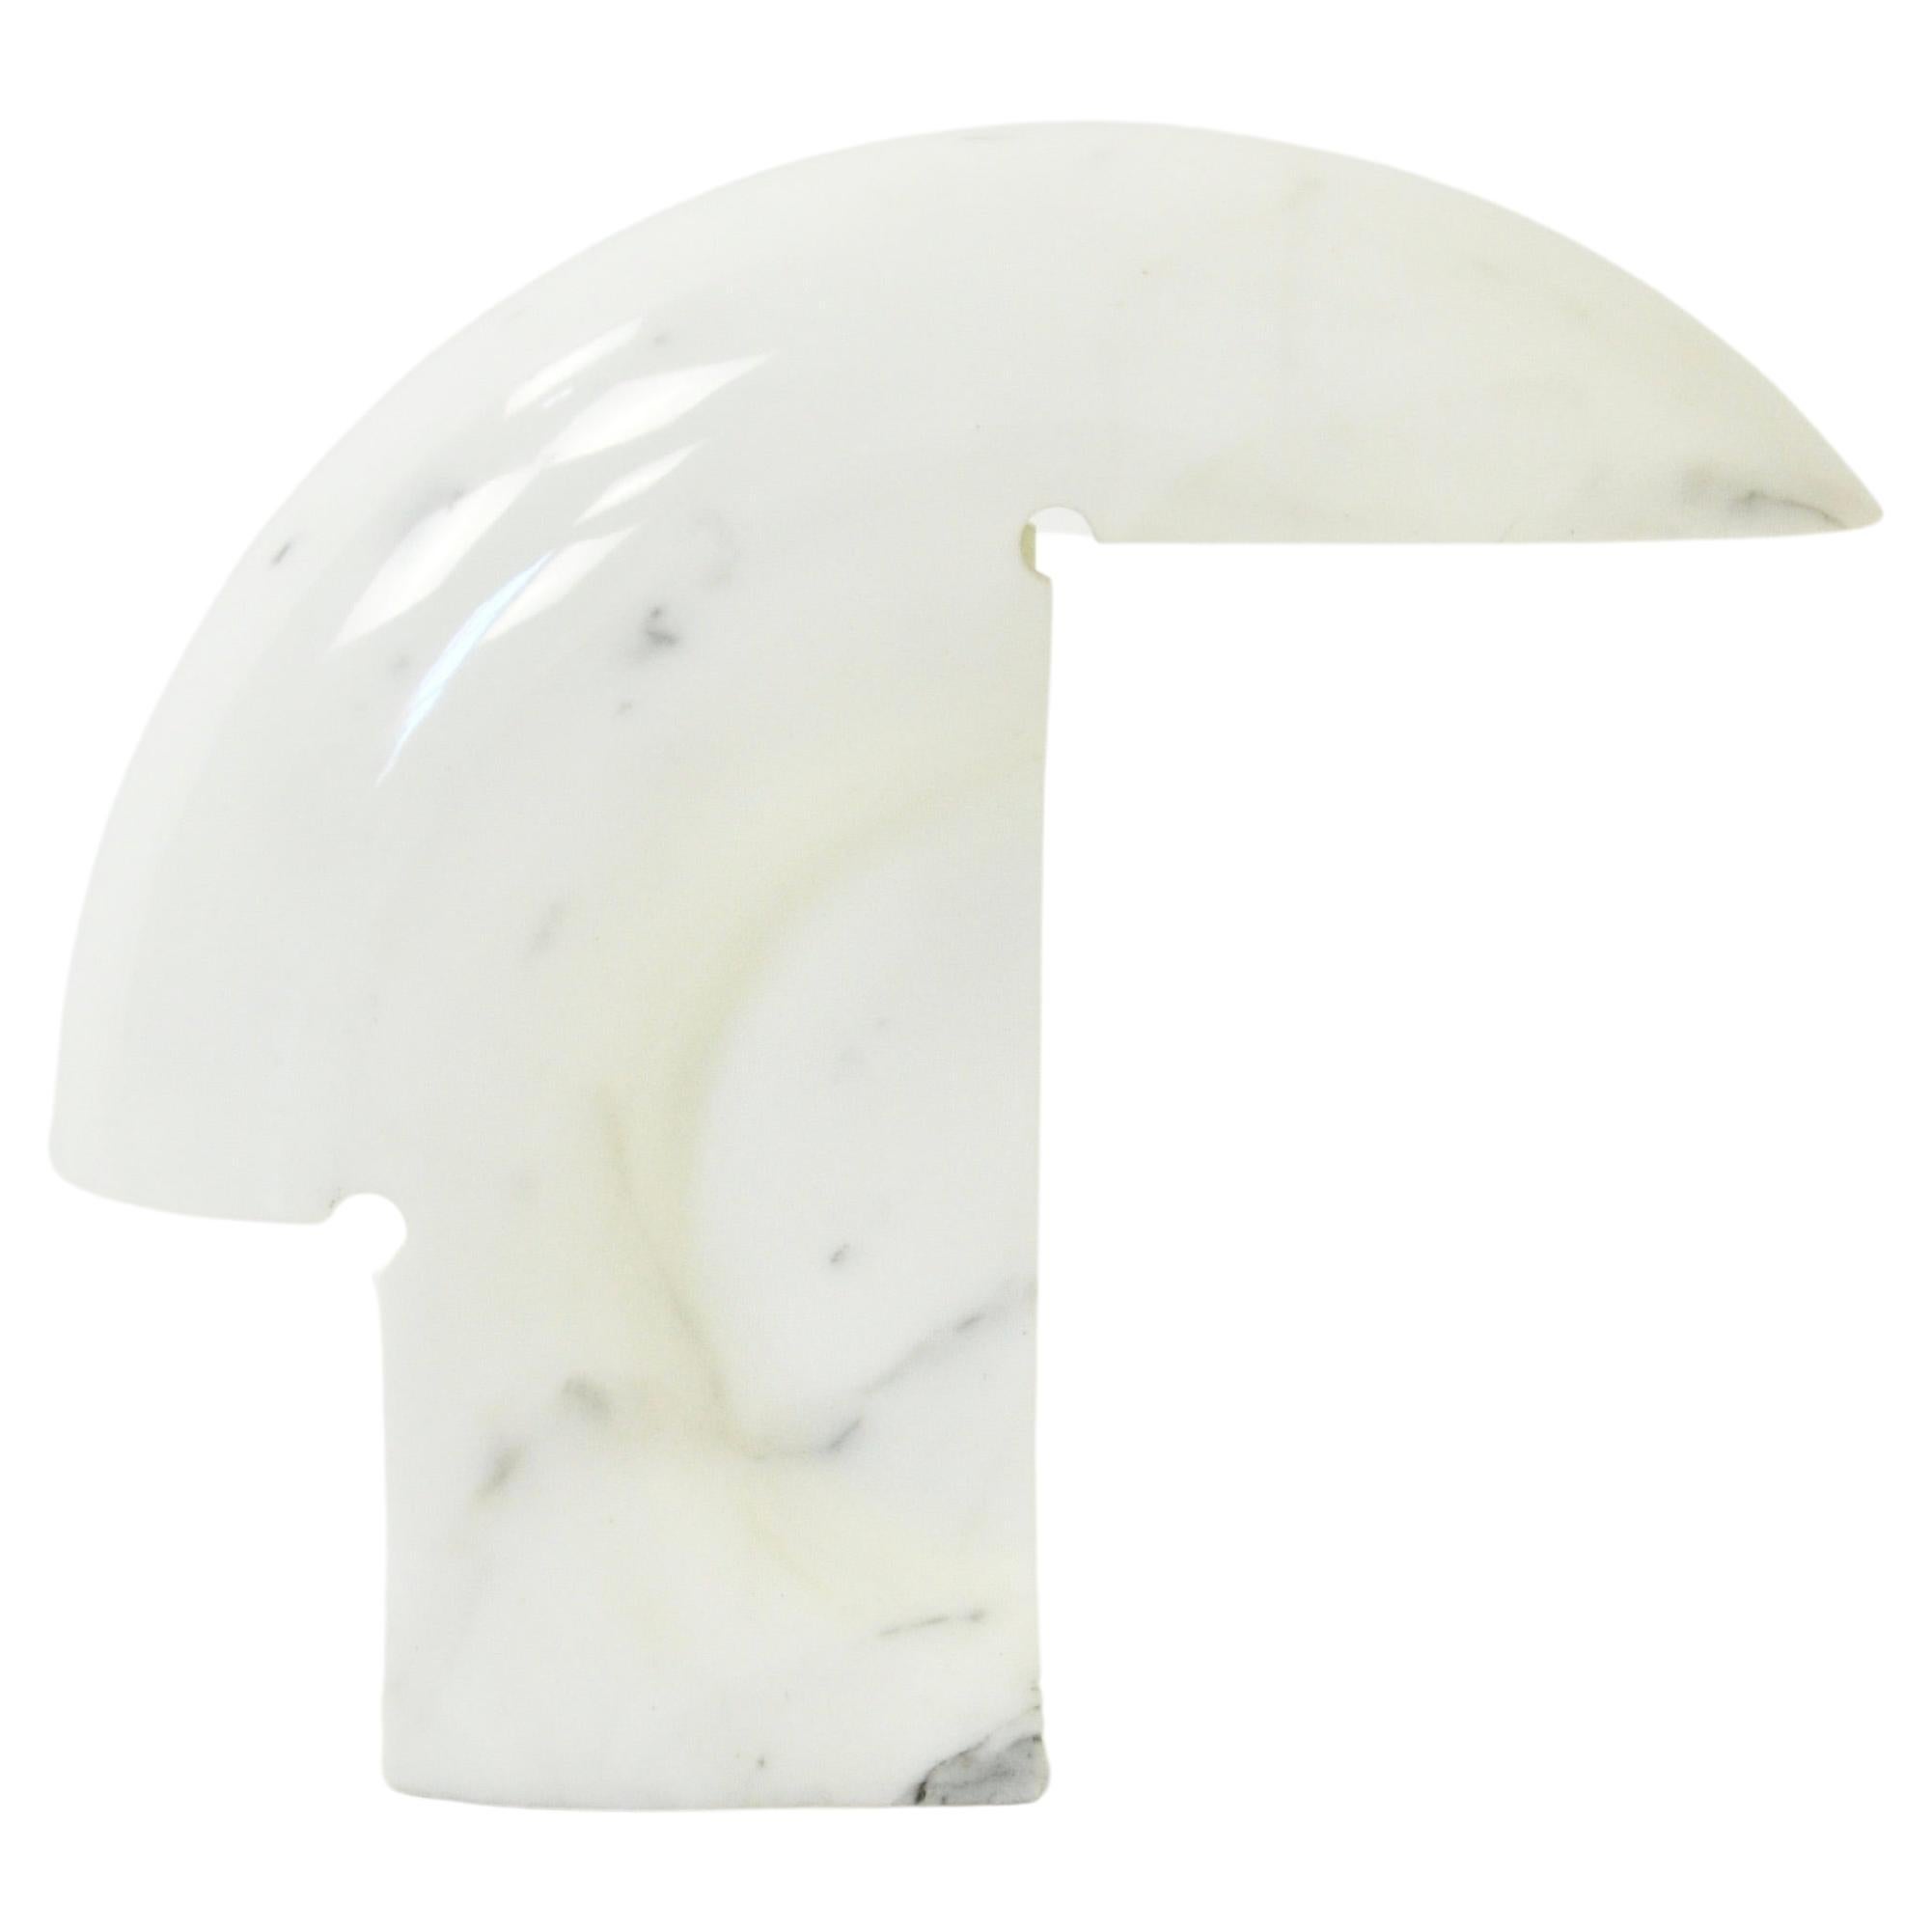 Marble Biagio Table Lamp by Tobia Scarpa for Flos, 1968 For Sale